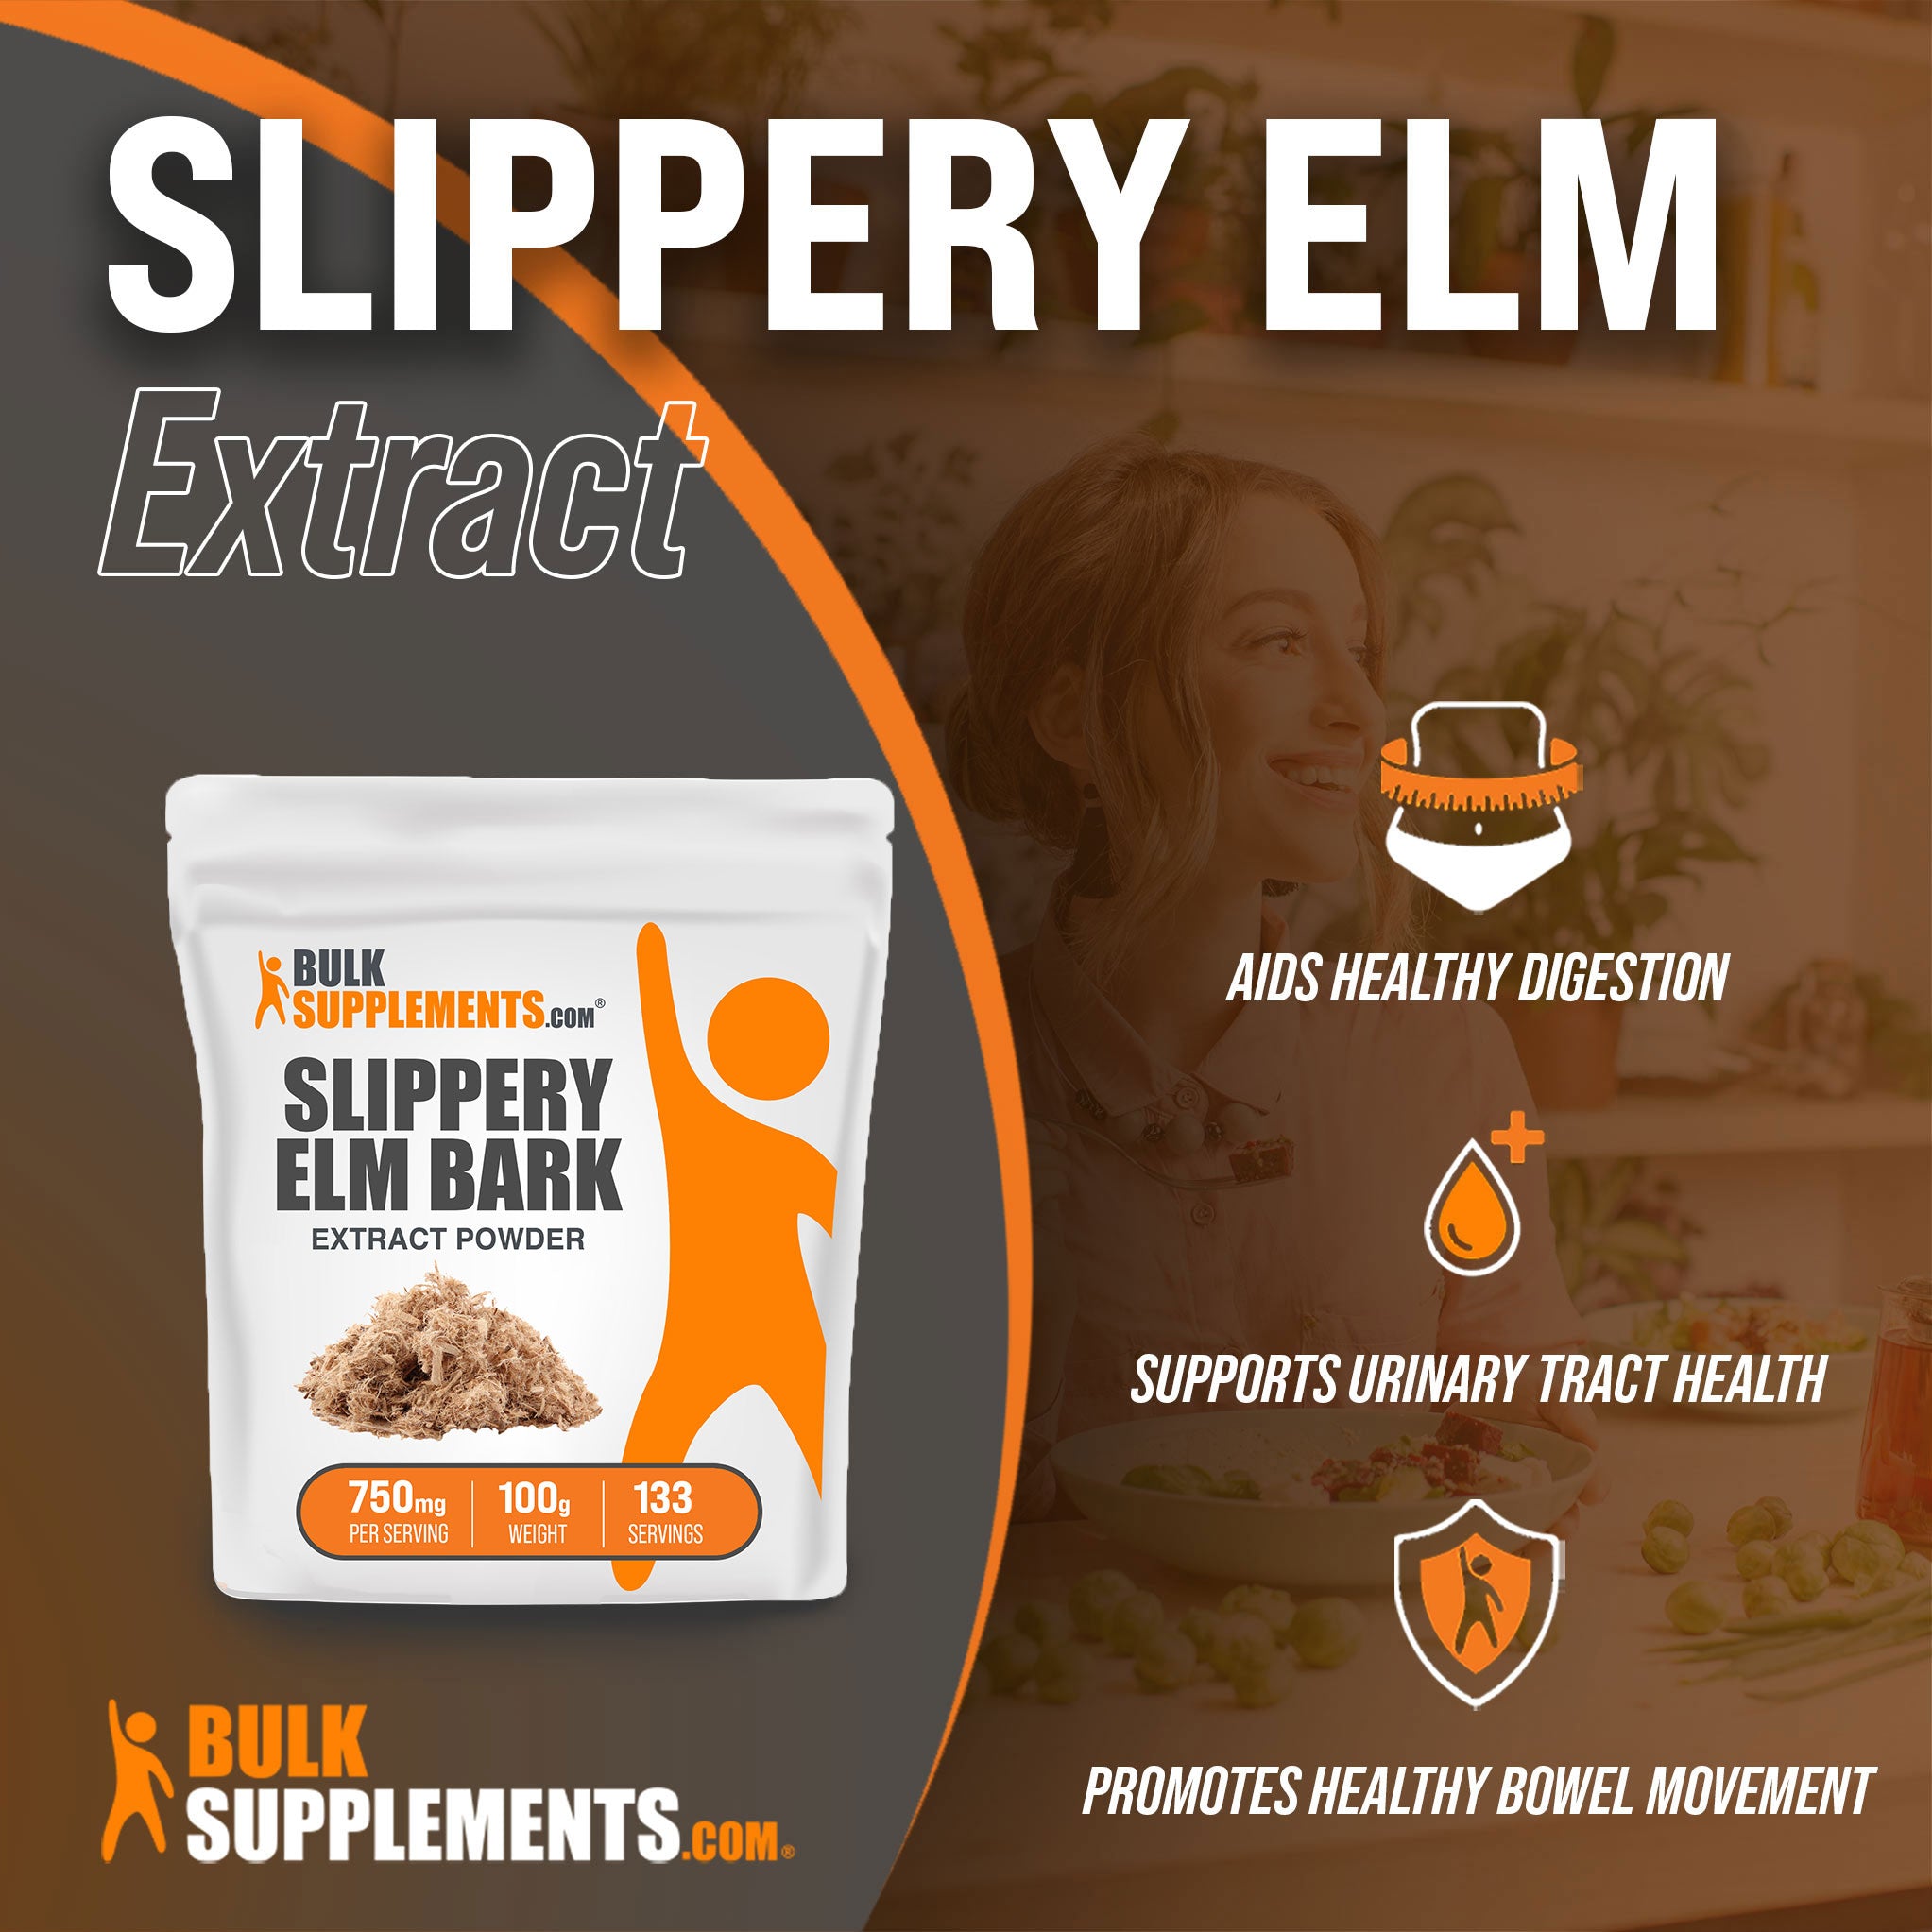 Benefits of Slippery Elm Extract: aids healthy digestion, supports urinary tract health, promotes healthy bowel movement